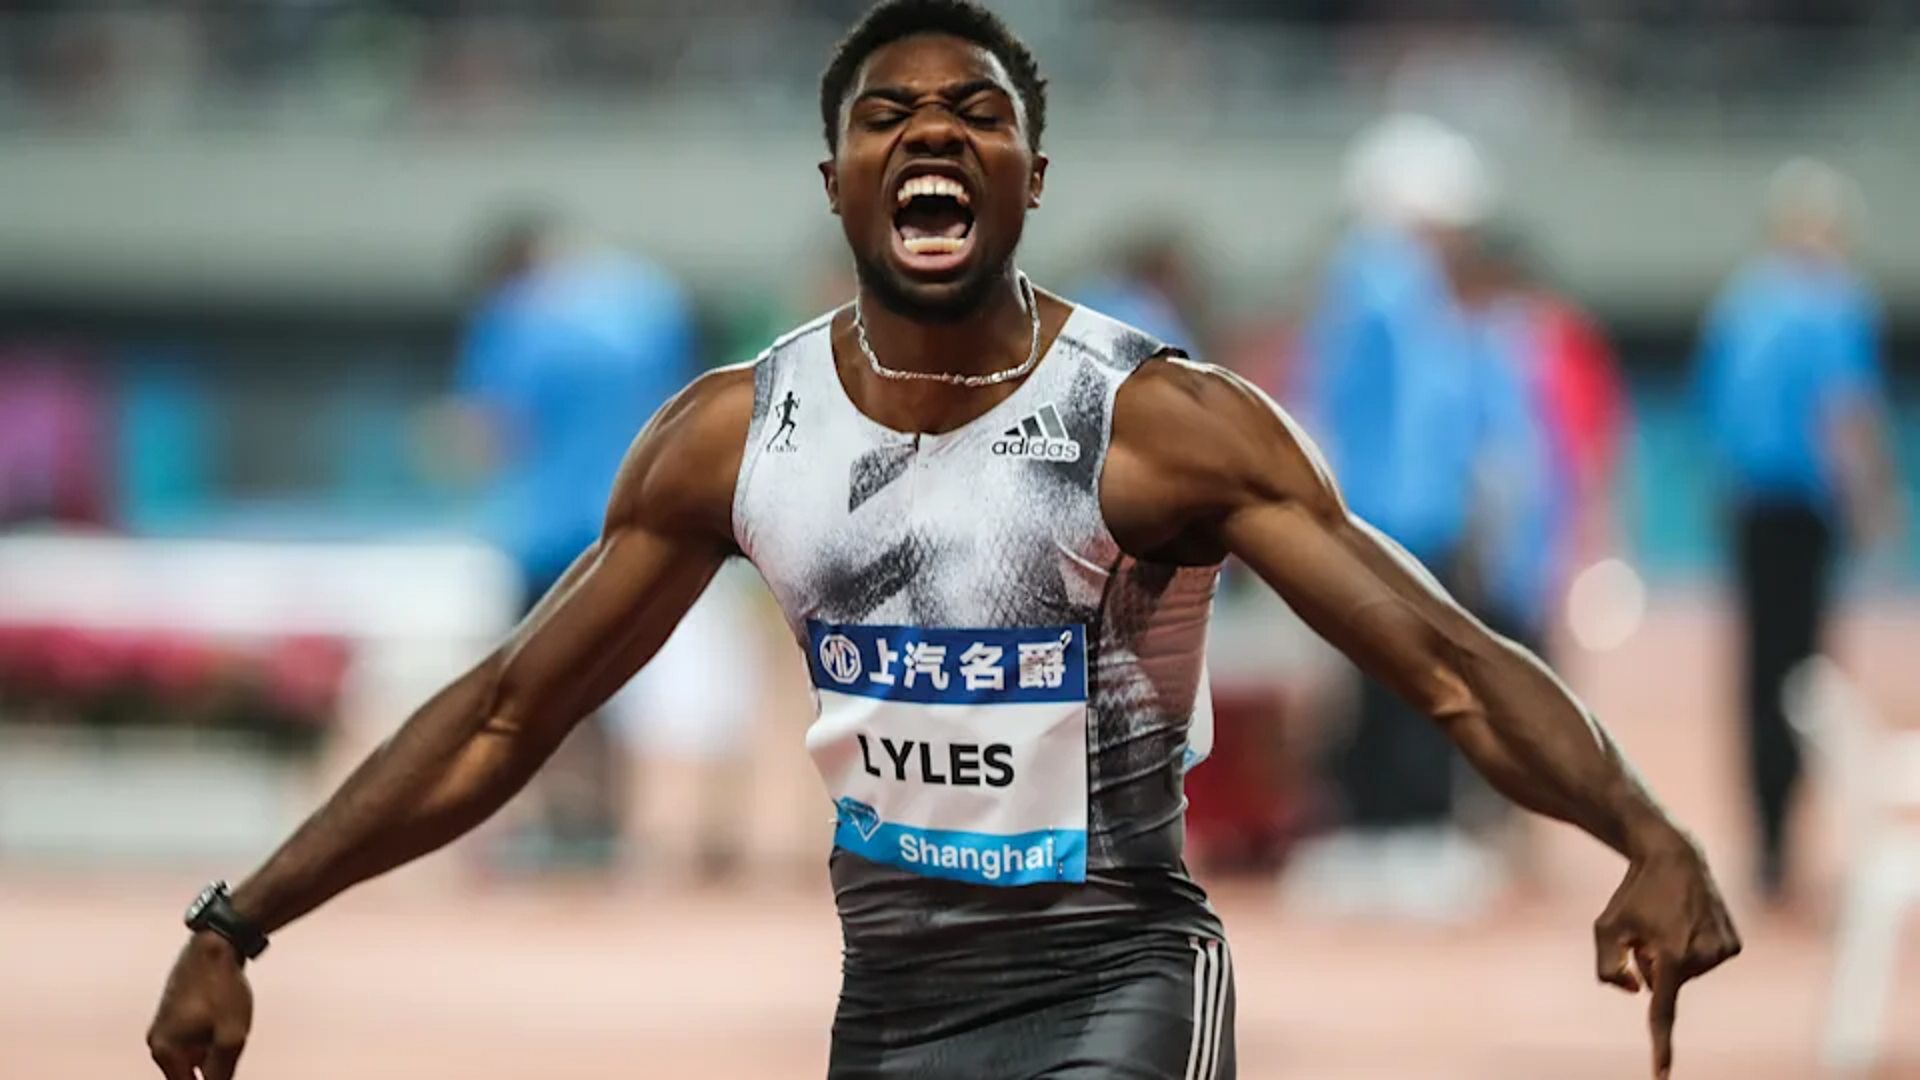 Noah Lyles in a file photo (Image Credits: Twitter)